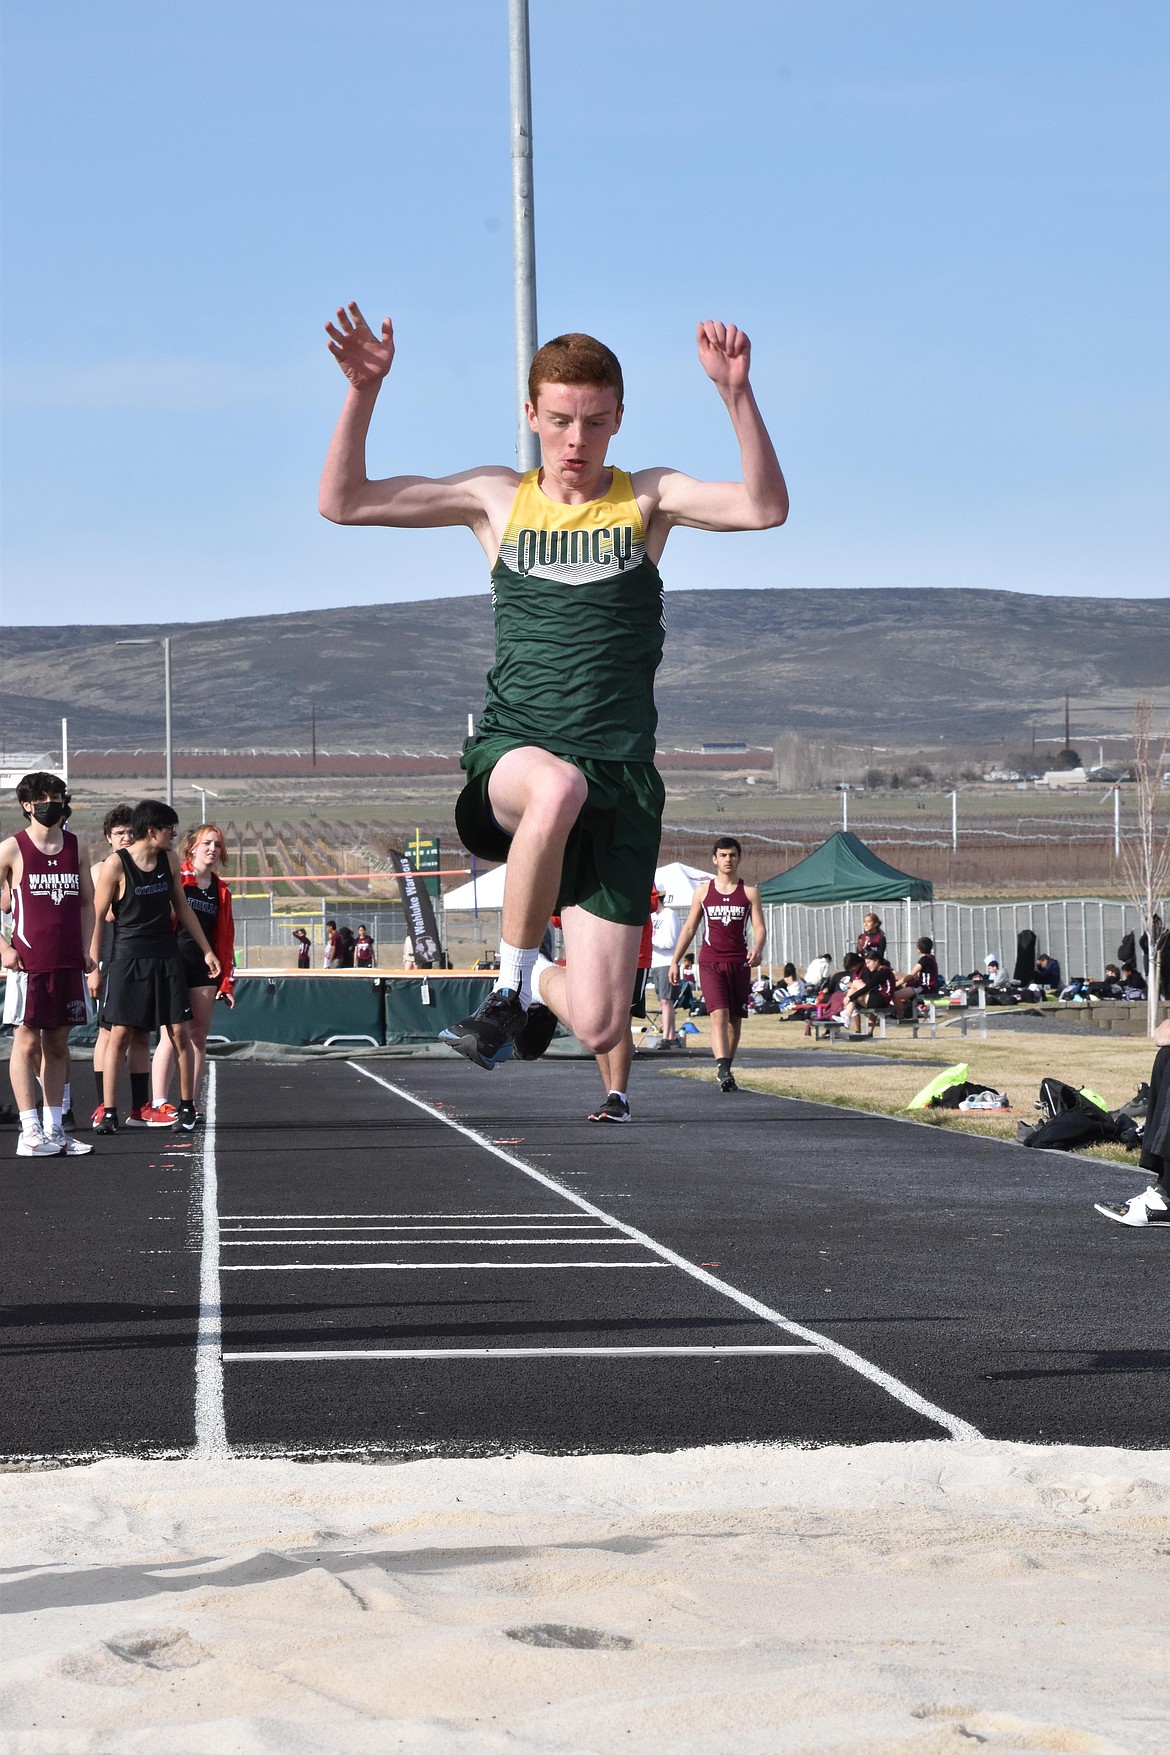 Quincy’s Levi Kukes placed second in the 3200-meter run at the Connell Invite on April 29. Kukes also participated in the 400-meter dash during that meet.